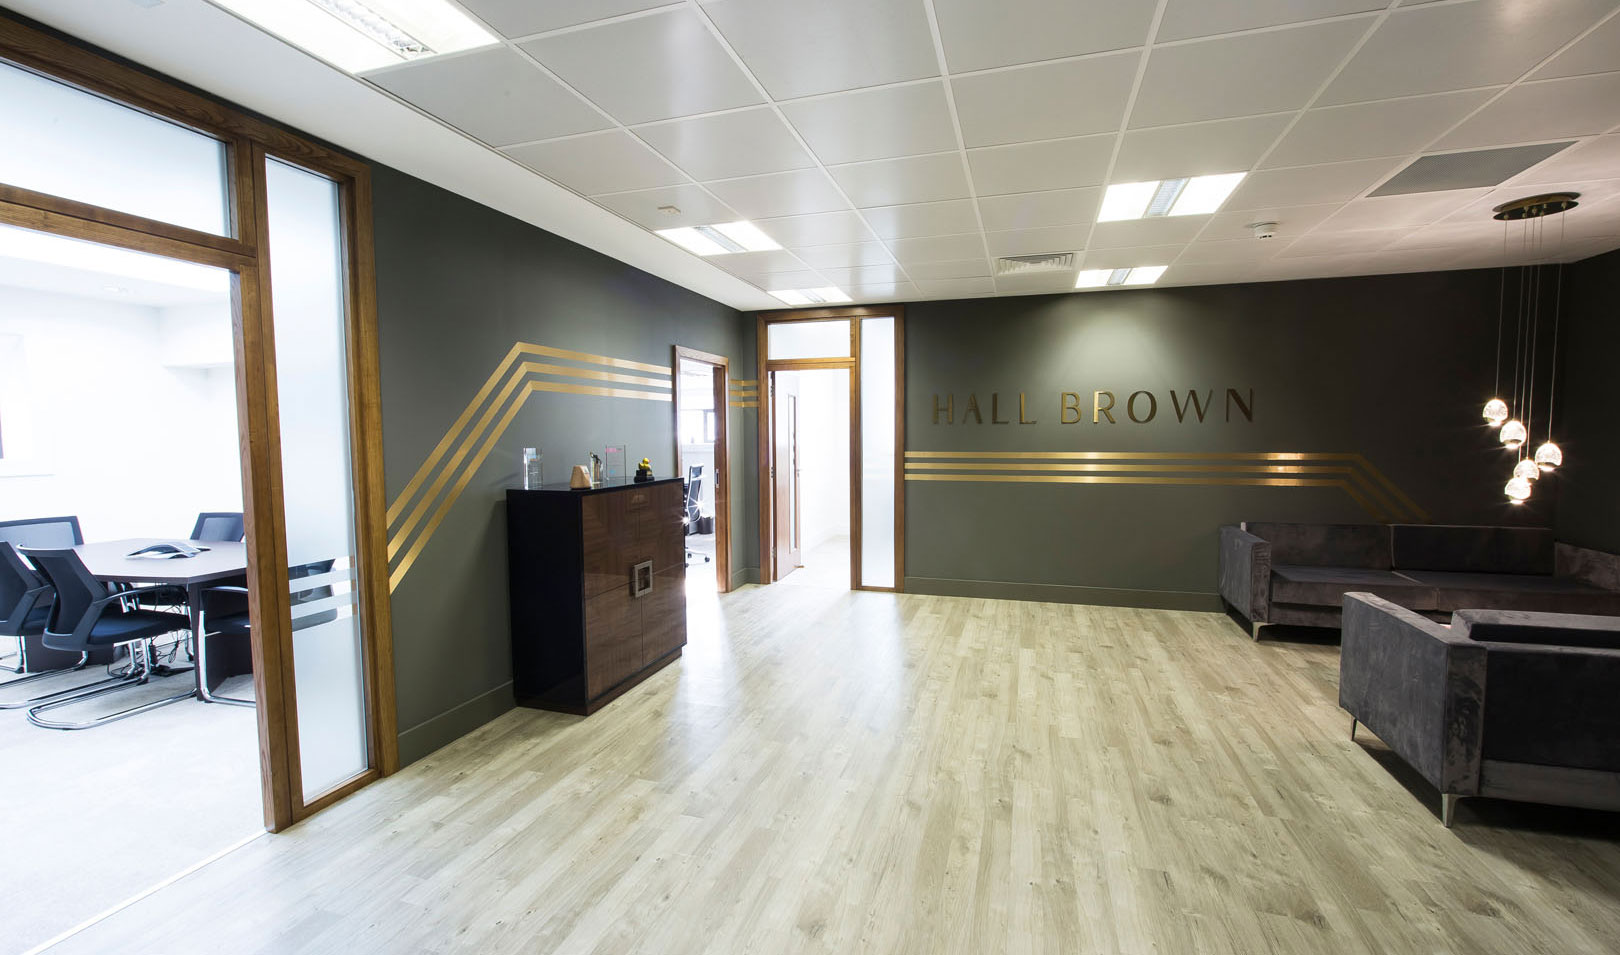 Hall-Brown-Manchester-Office-Fit-Out.jpg